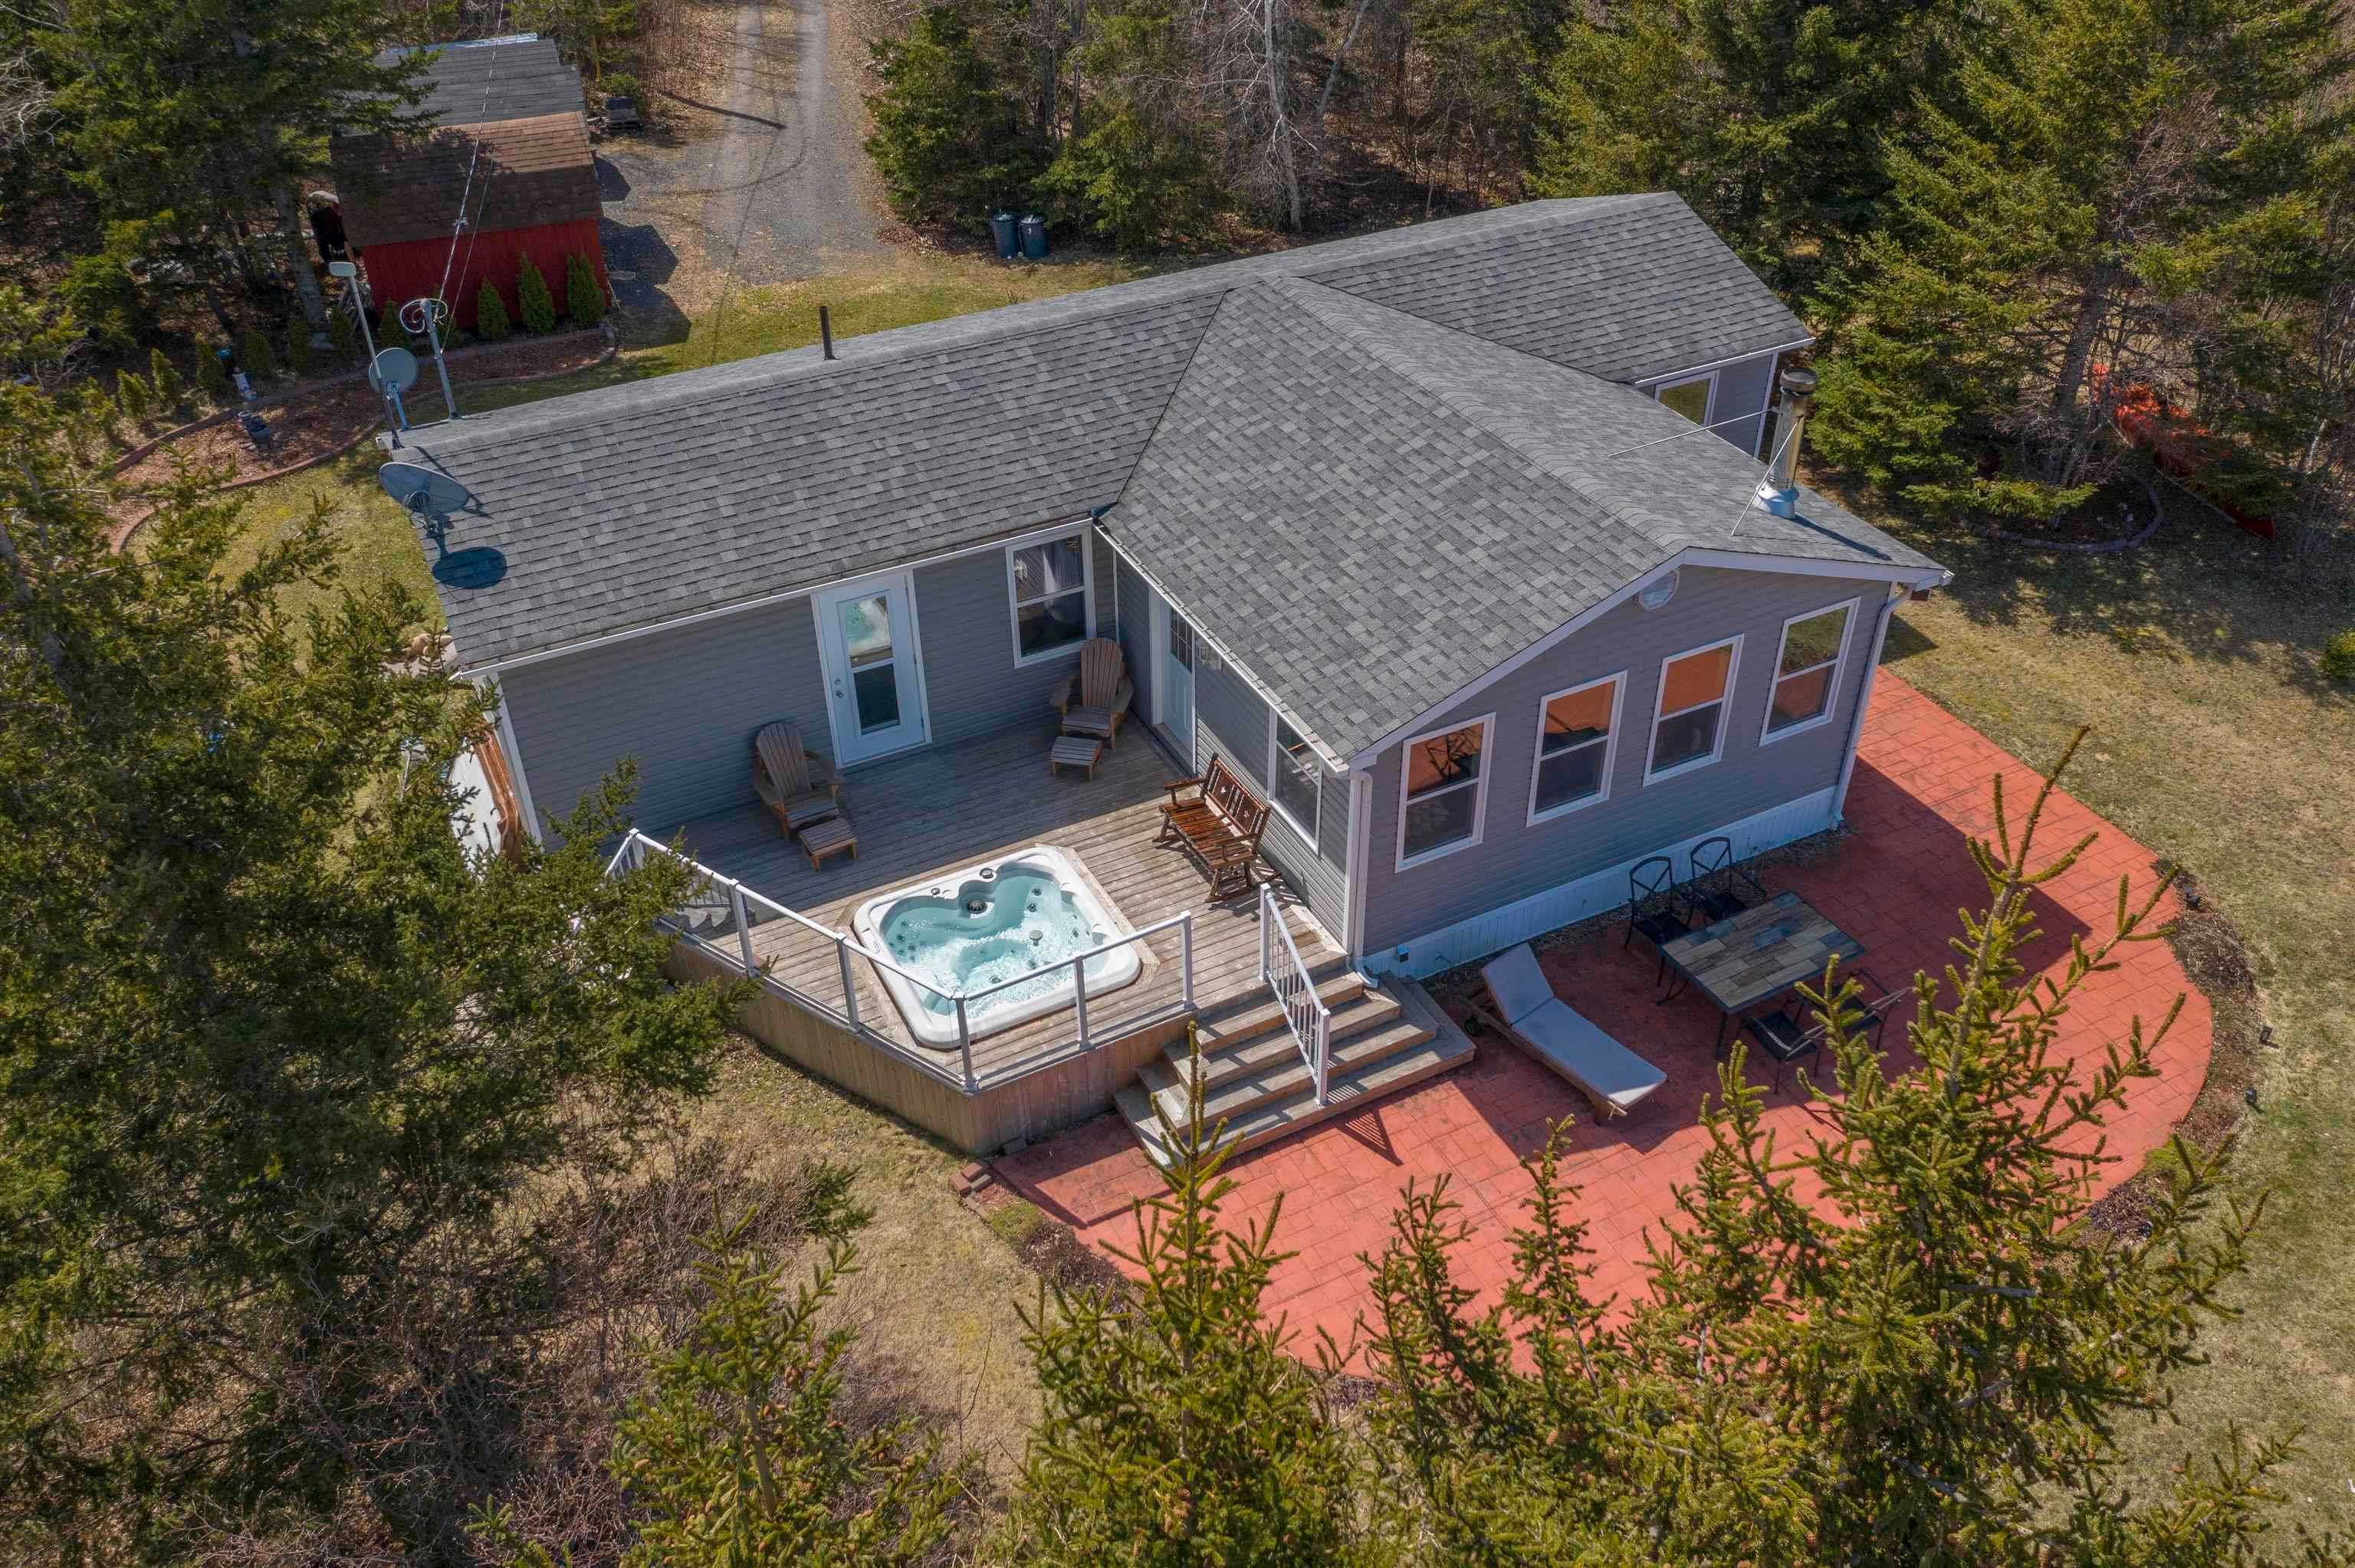 Main Photo: 22 Wharf Road in Merigomish: 108-Rural Pictou County Residential for sale (Northern Region)  : MLS®# 202207992